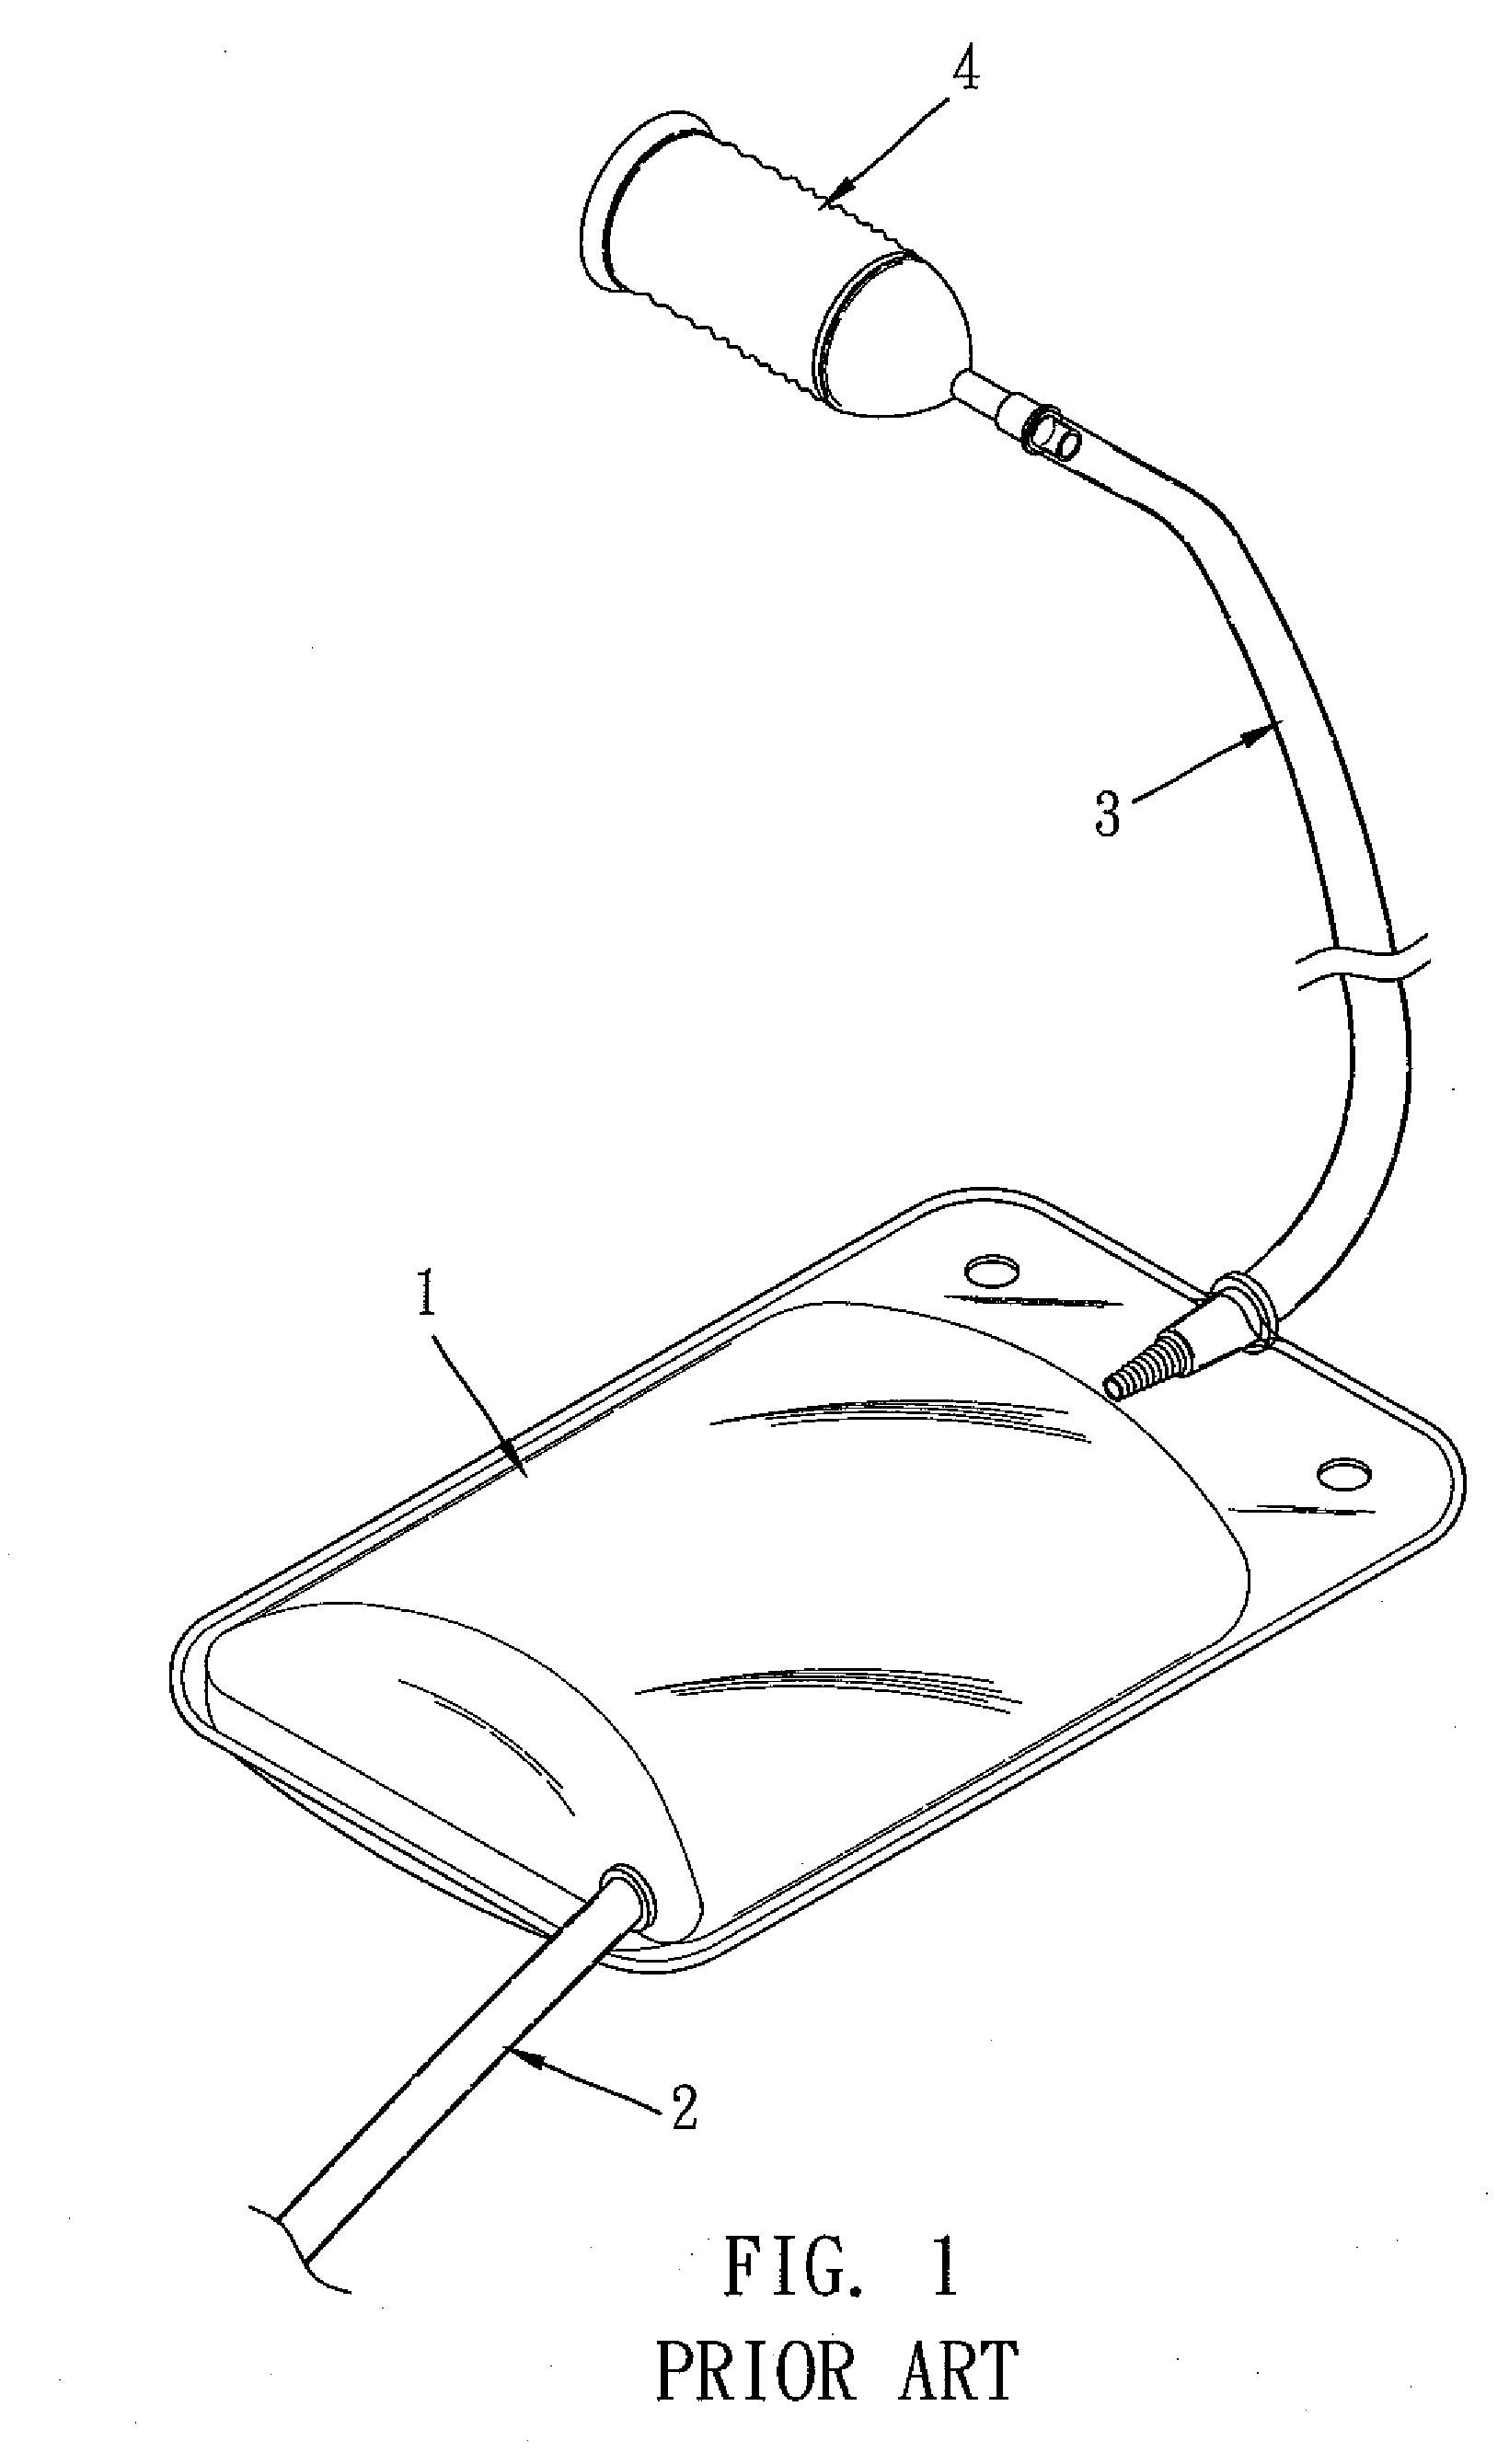 Catheterization Device for a Urine Bag